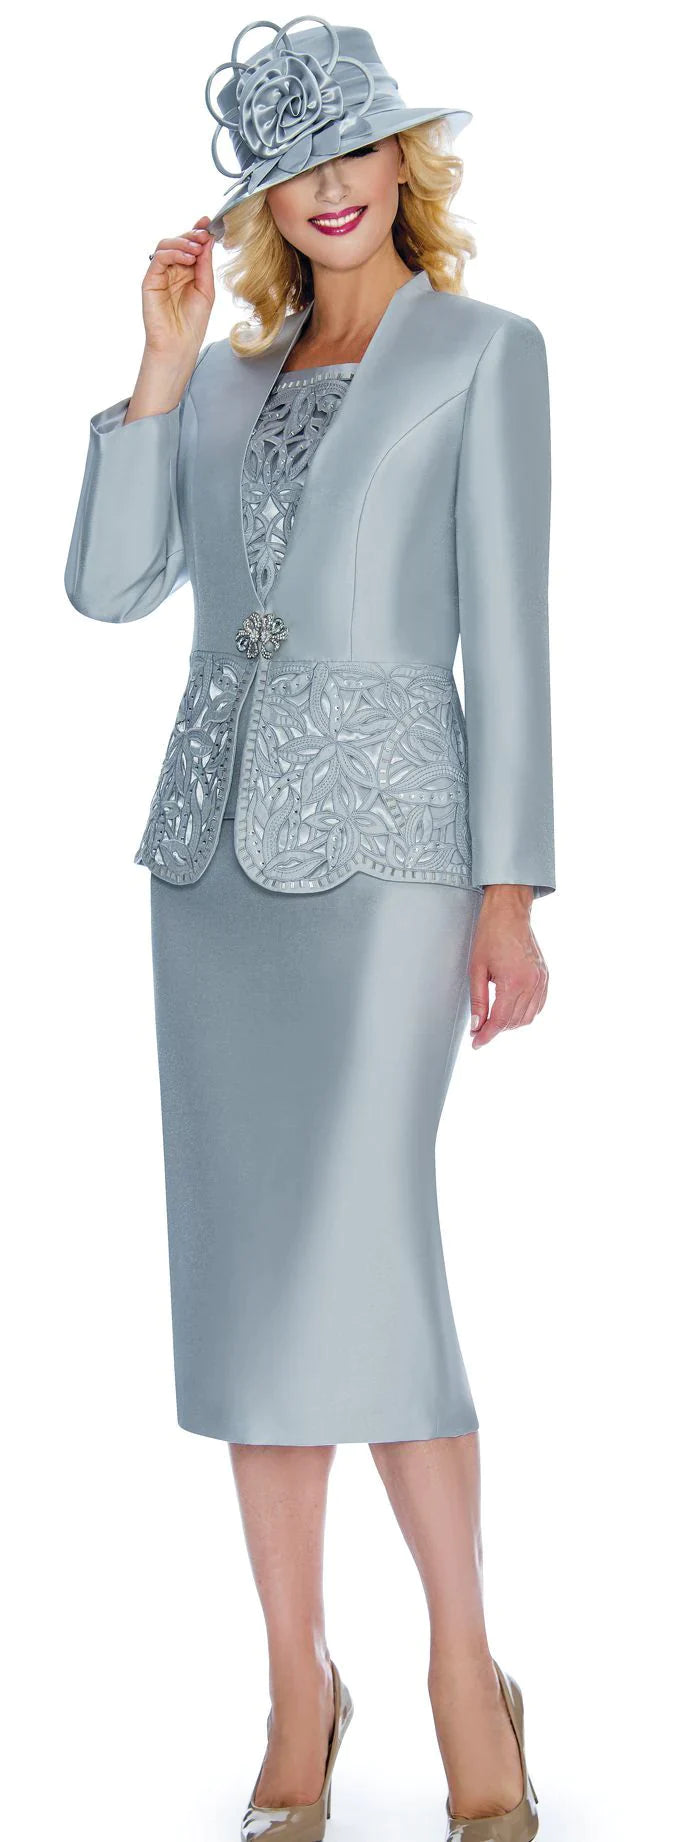 Giovanna Church Suit G1088-Silver - Church Suits For Less